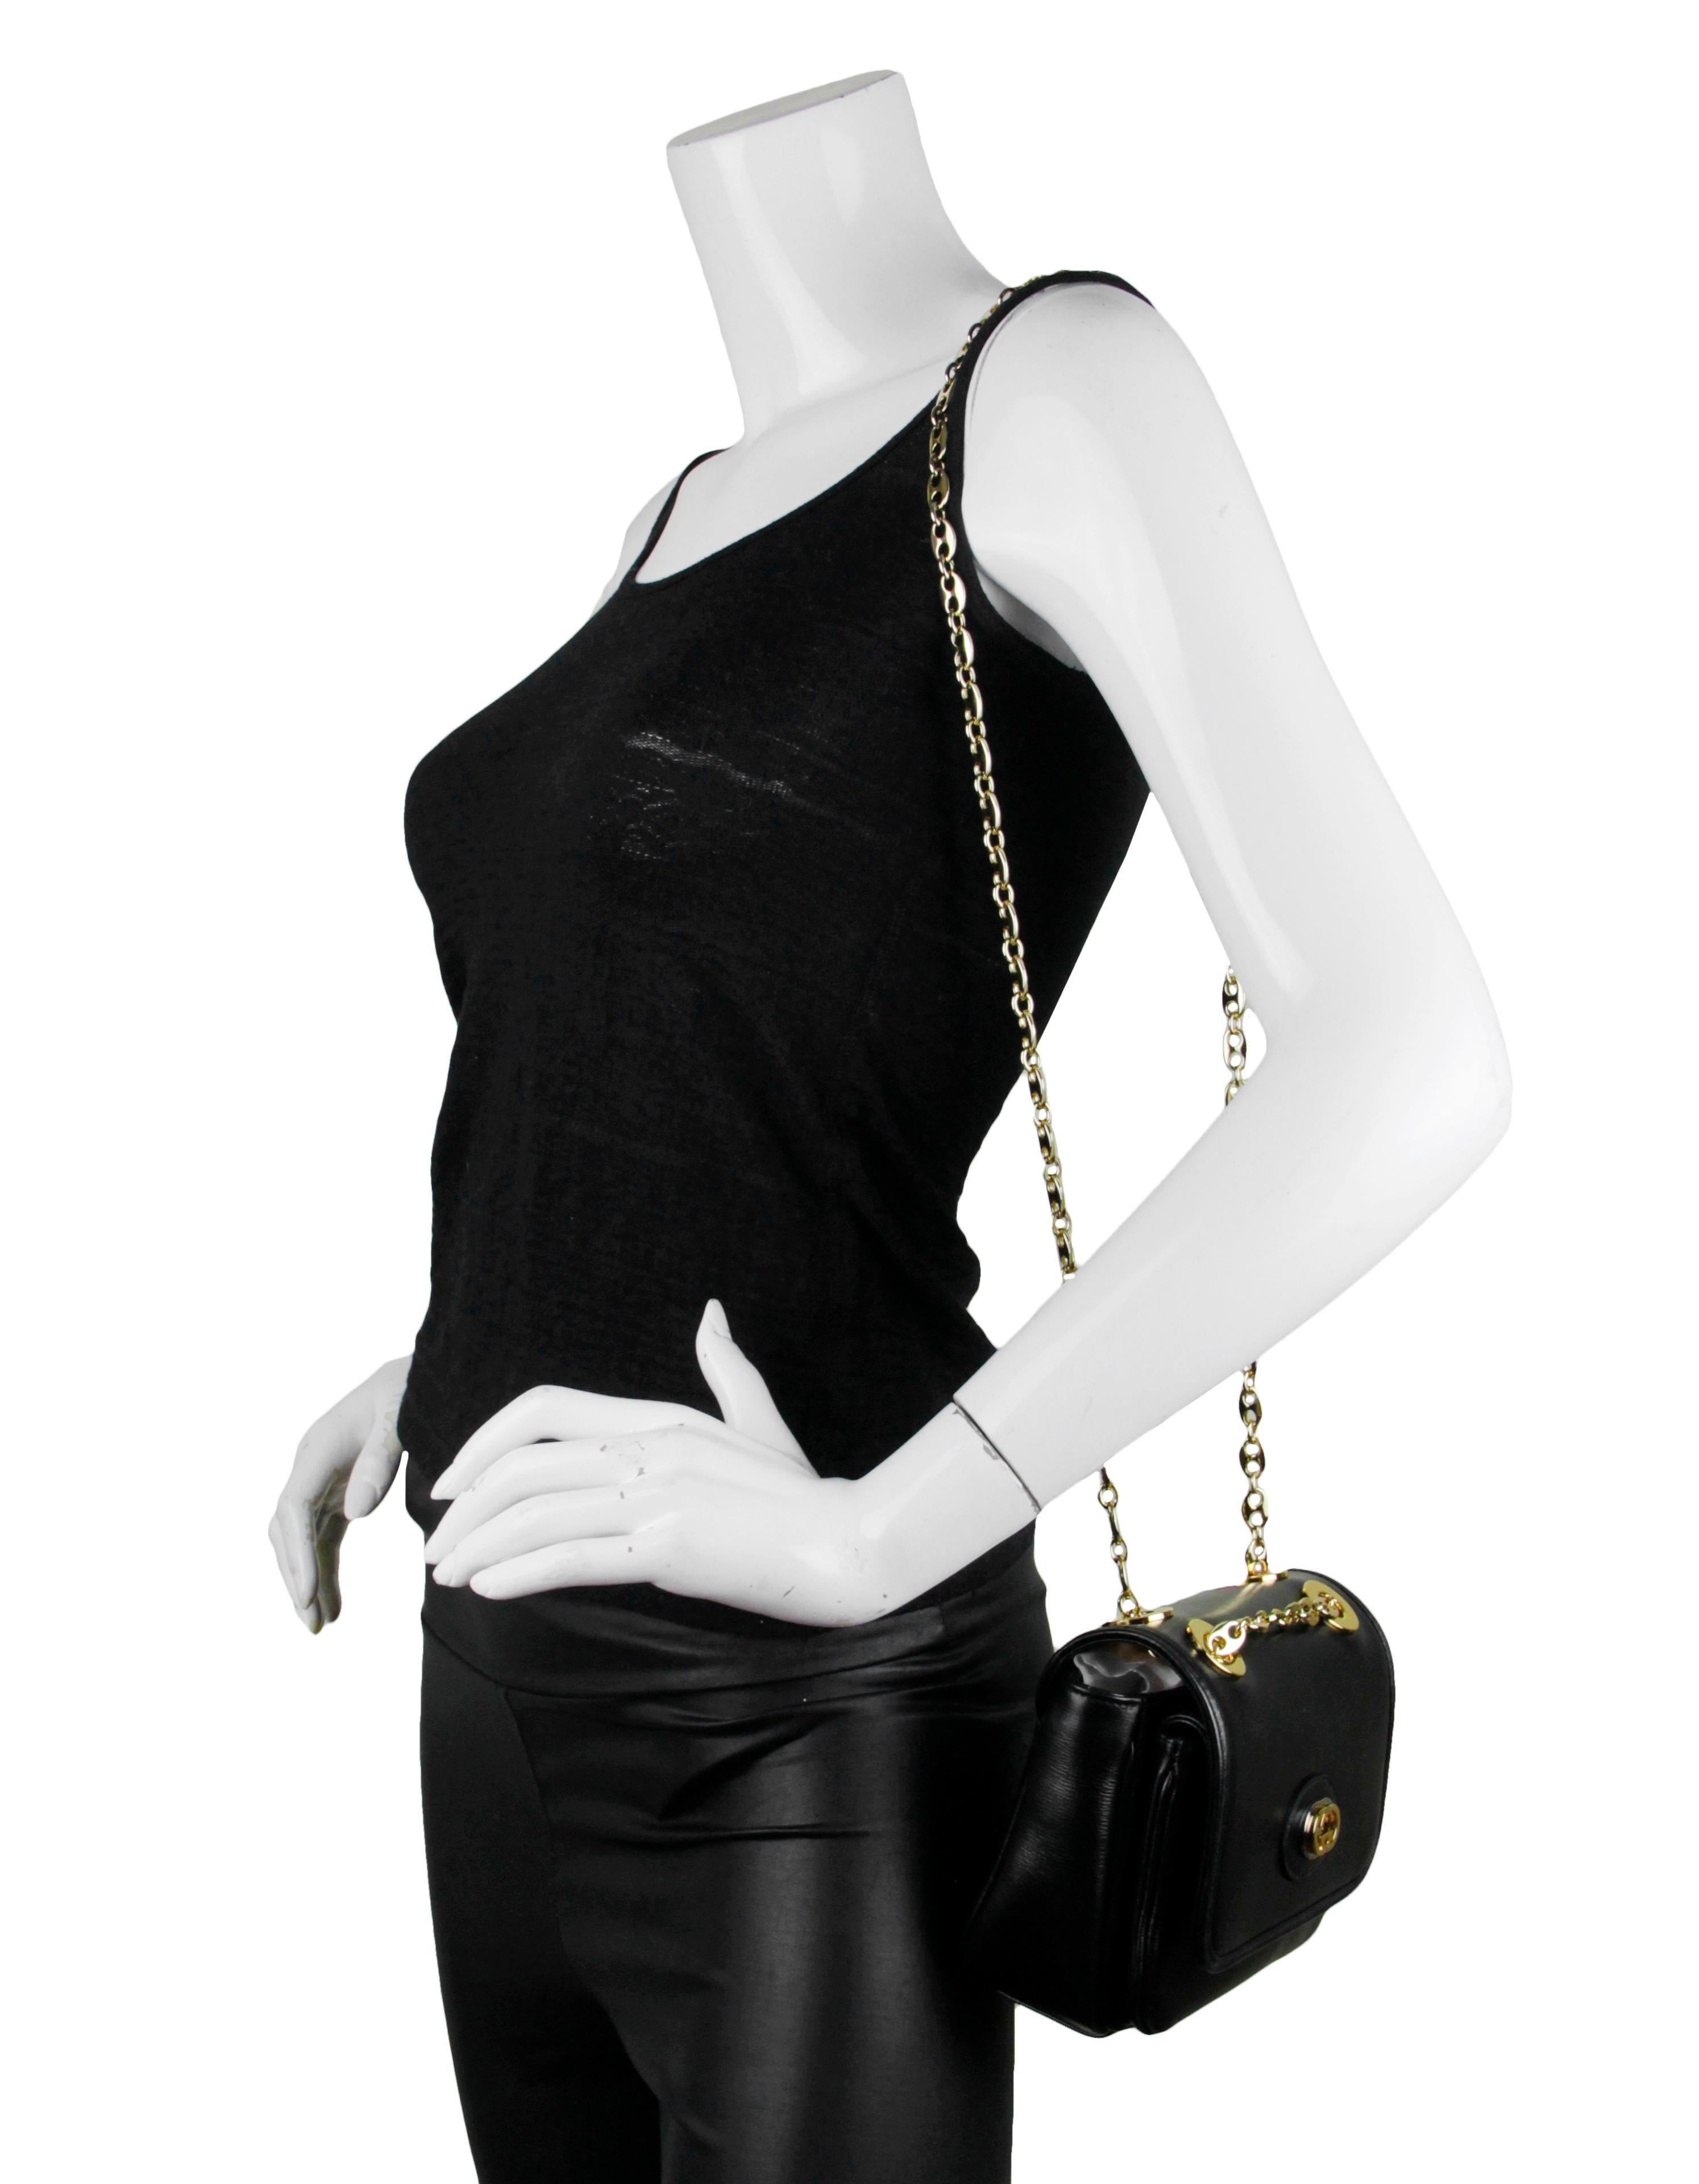 Gucci Black Leather GG Mini Marina Chain Shoulder Bag. Chain can be doubled on the shoulder or singled to be worn as a crossbody. Style number 576423 467891. 

Made In: Italy
Color: Black 
Hardware: Goldtone with silver detail at front logo